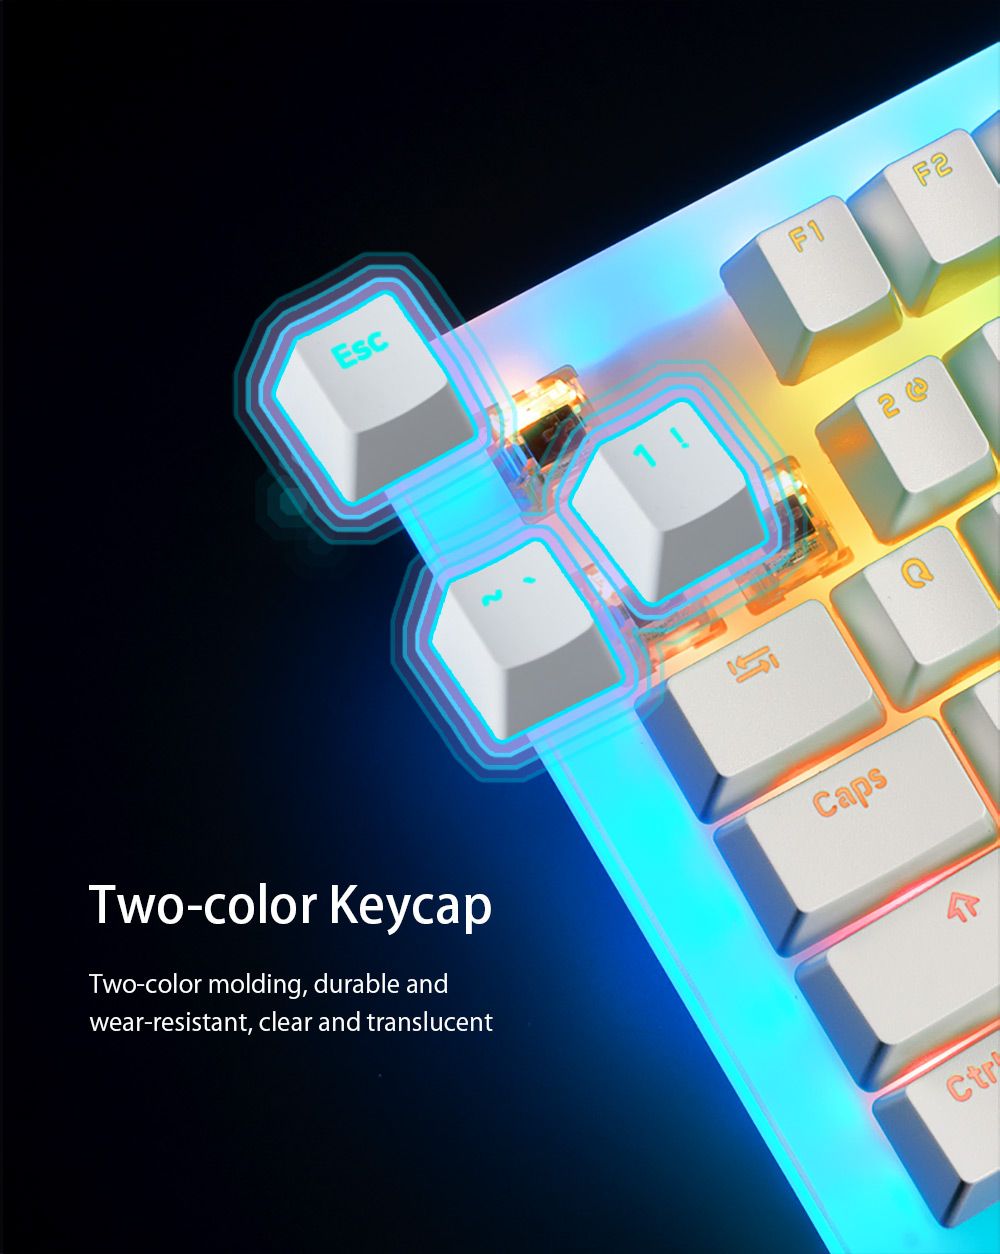 GamaKay-K87-87-Keys-Mechanical-Gaming-Keyboard-Hot-Swappable-Type-C-Wired-USB-31-Translucent-Glass-B-1703697